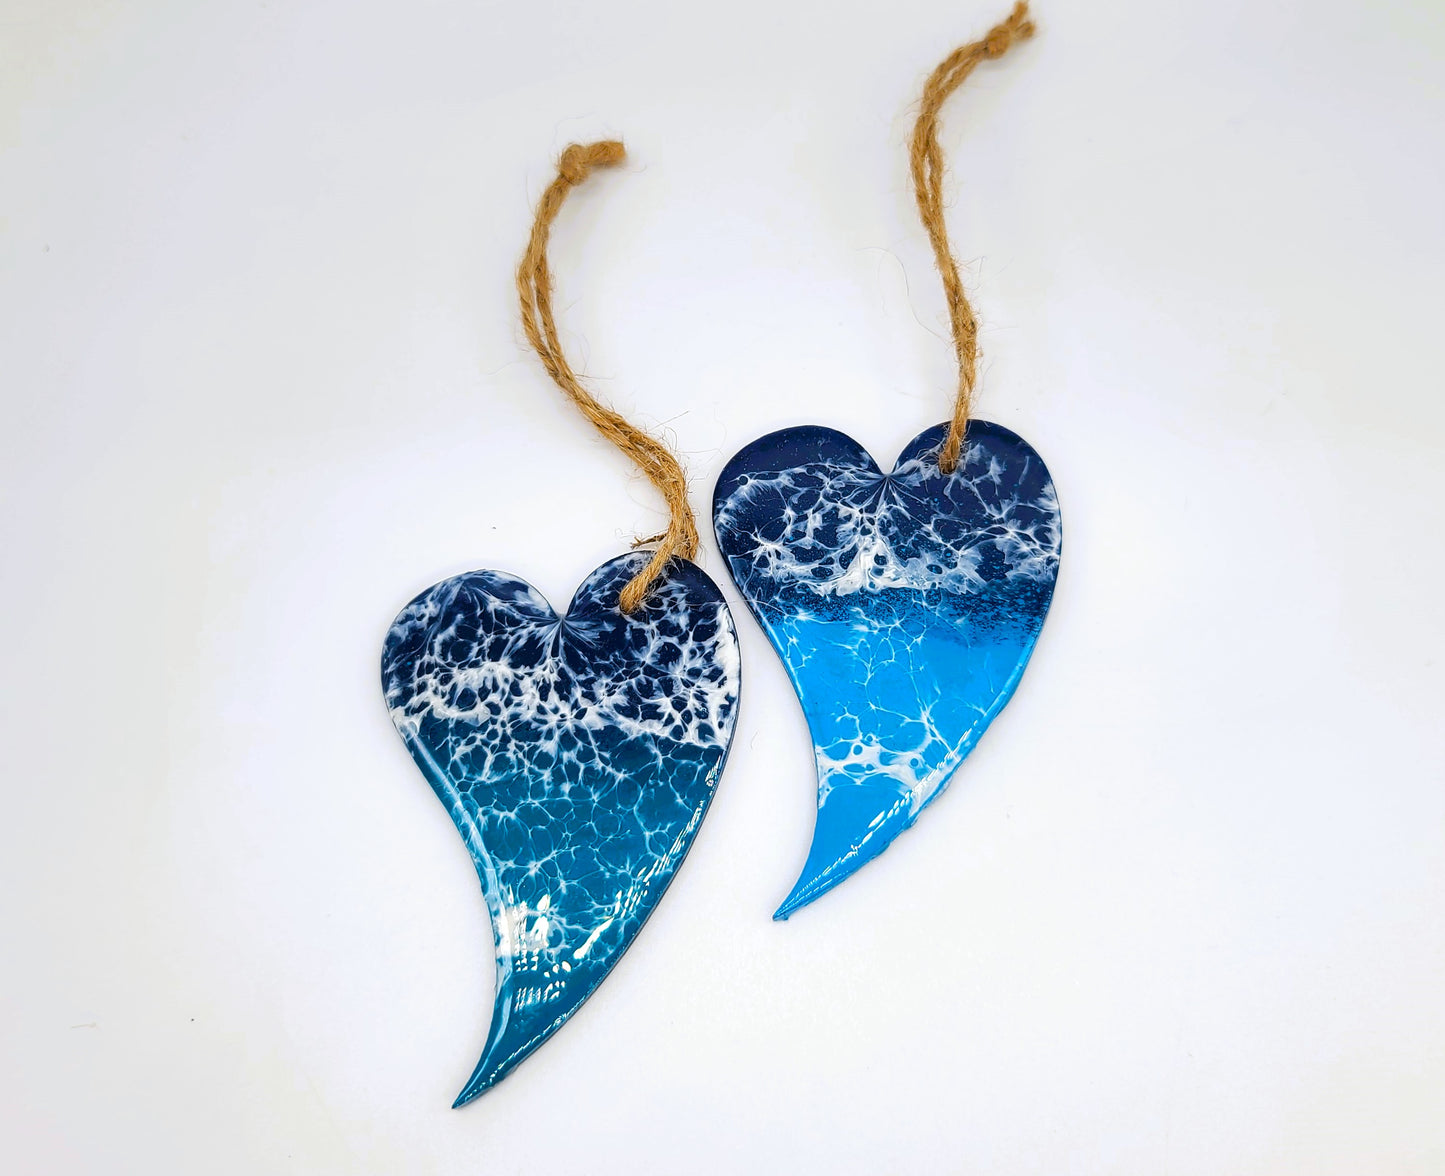 Resin and Wood Sealife Ornament